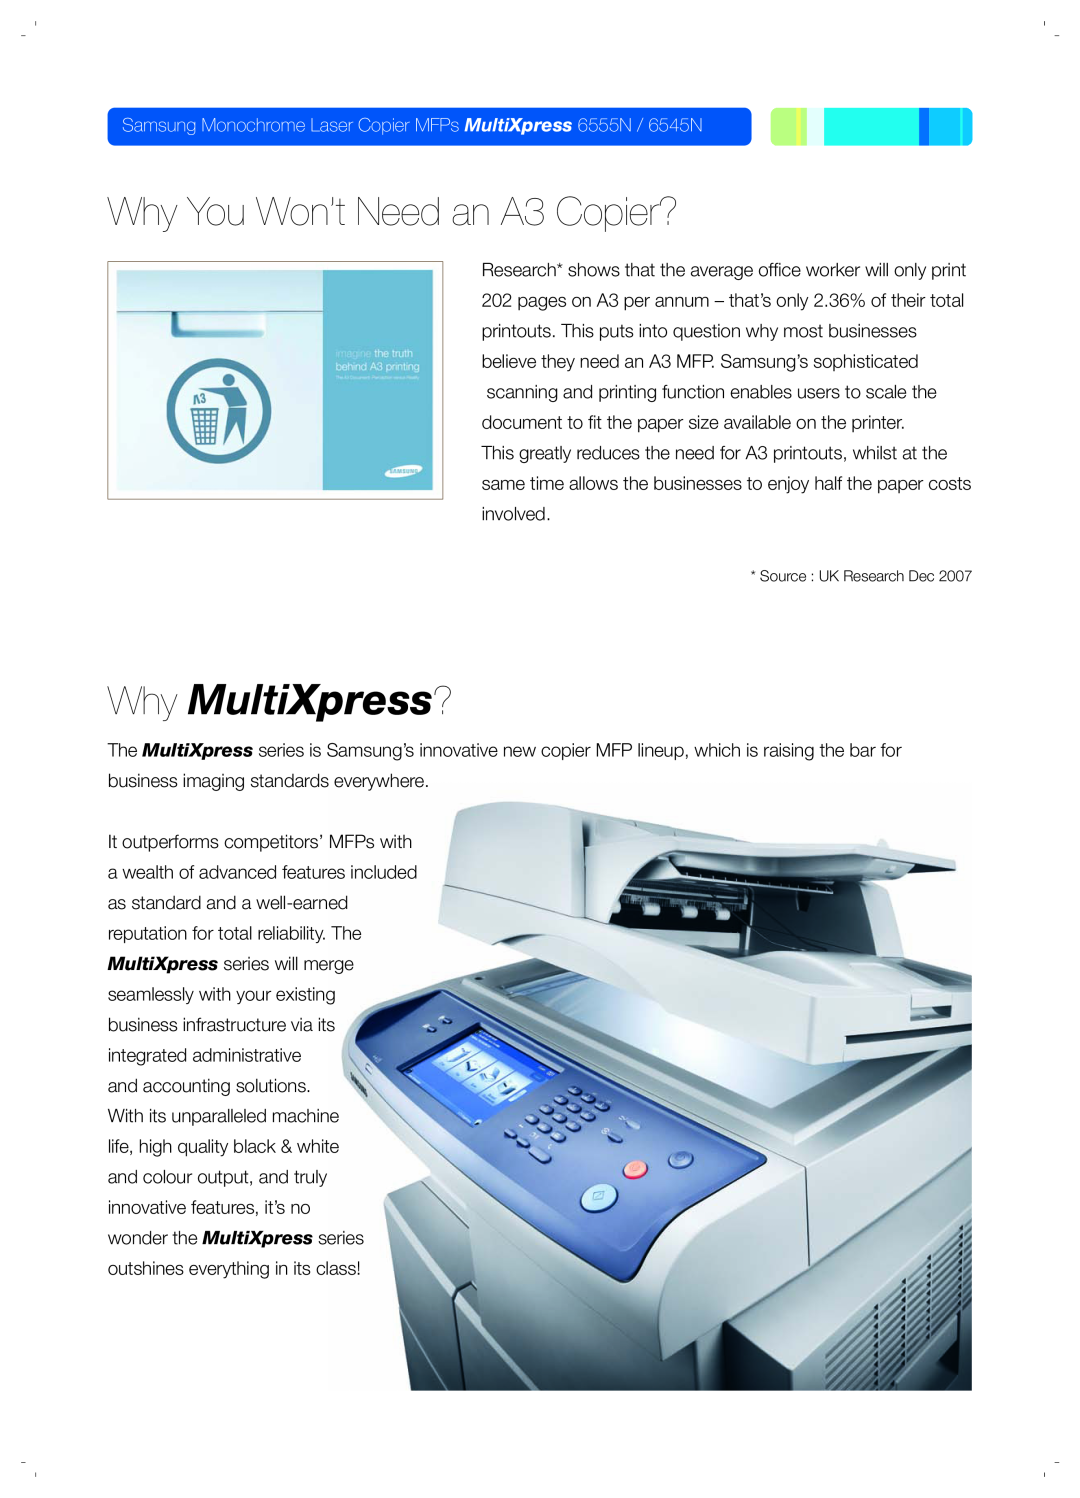 Samsung SCXFIN20S manual Why You Won’t Need an A3 Copier?, Why MultiXpress? 